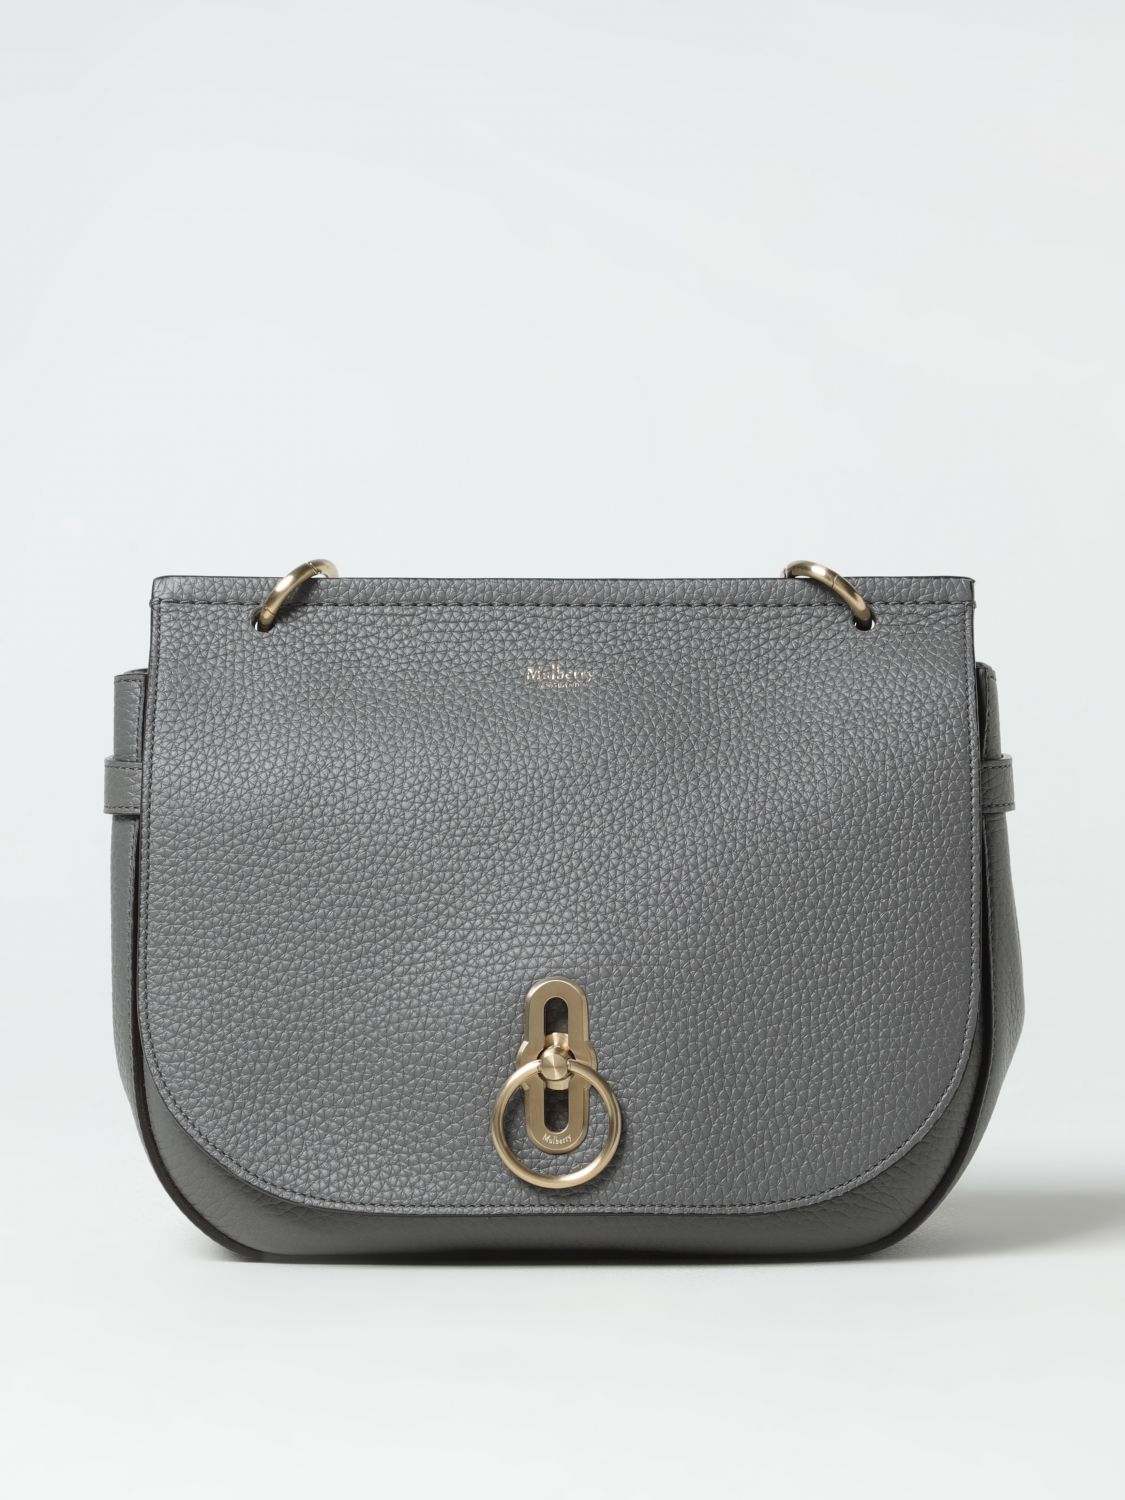 Mulberry Crossbody Bags MULBERRY Woman colour Grey